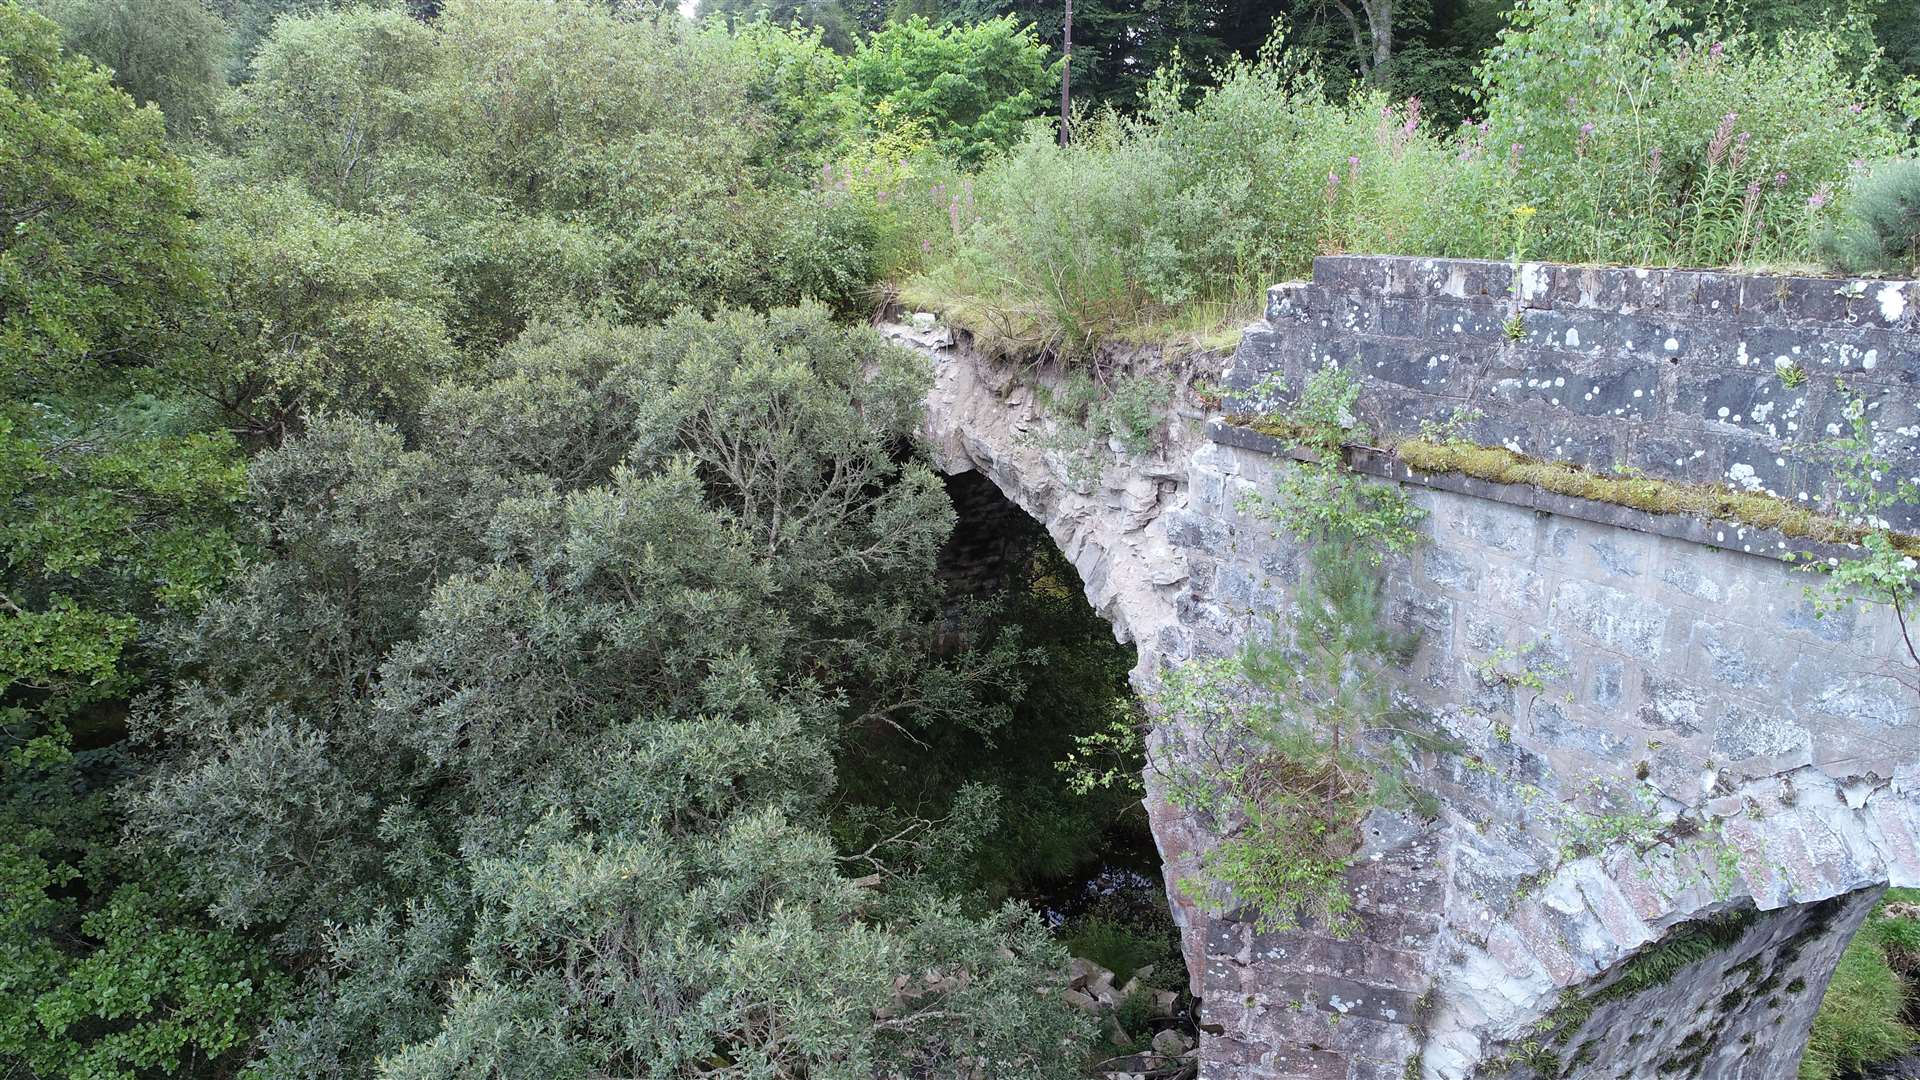 Now covered in vegetation and in a deteriorating condition, Inveran Bridge carried the former line of the A837 public road over the River Shin. It was designed by Thomas Telford. Picture: Gregor Laing